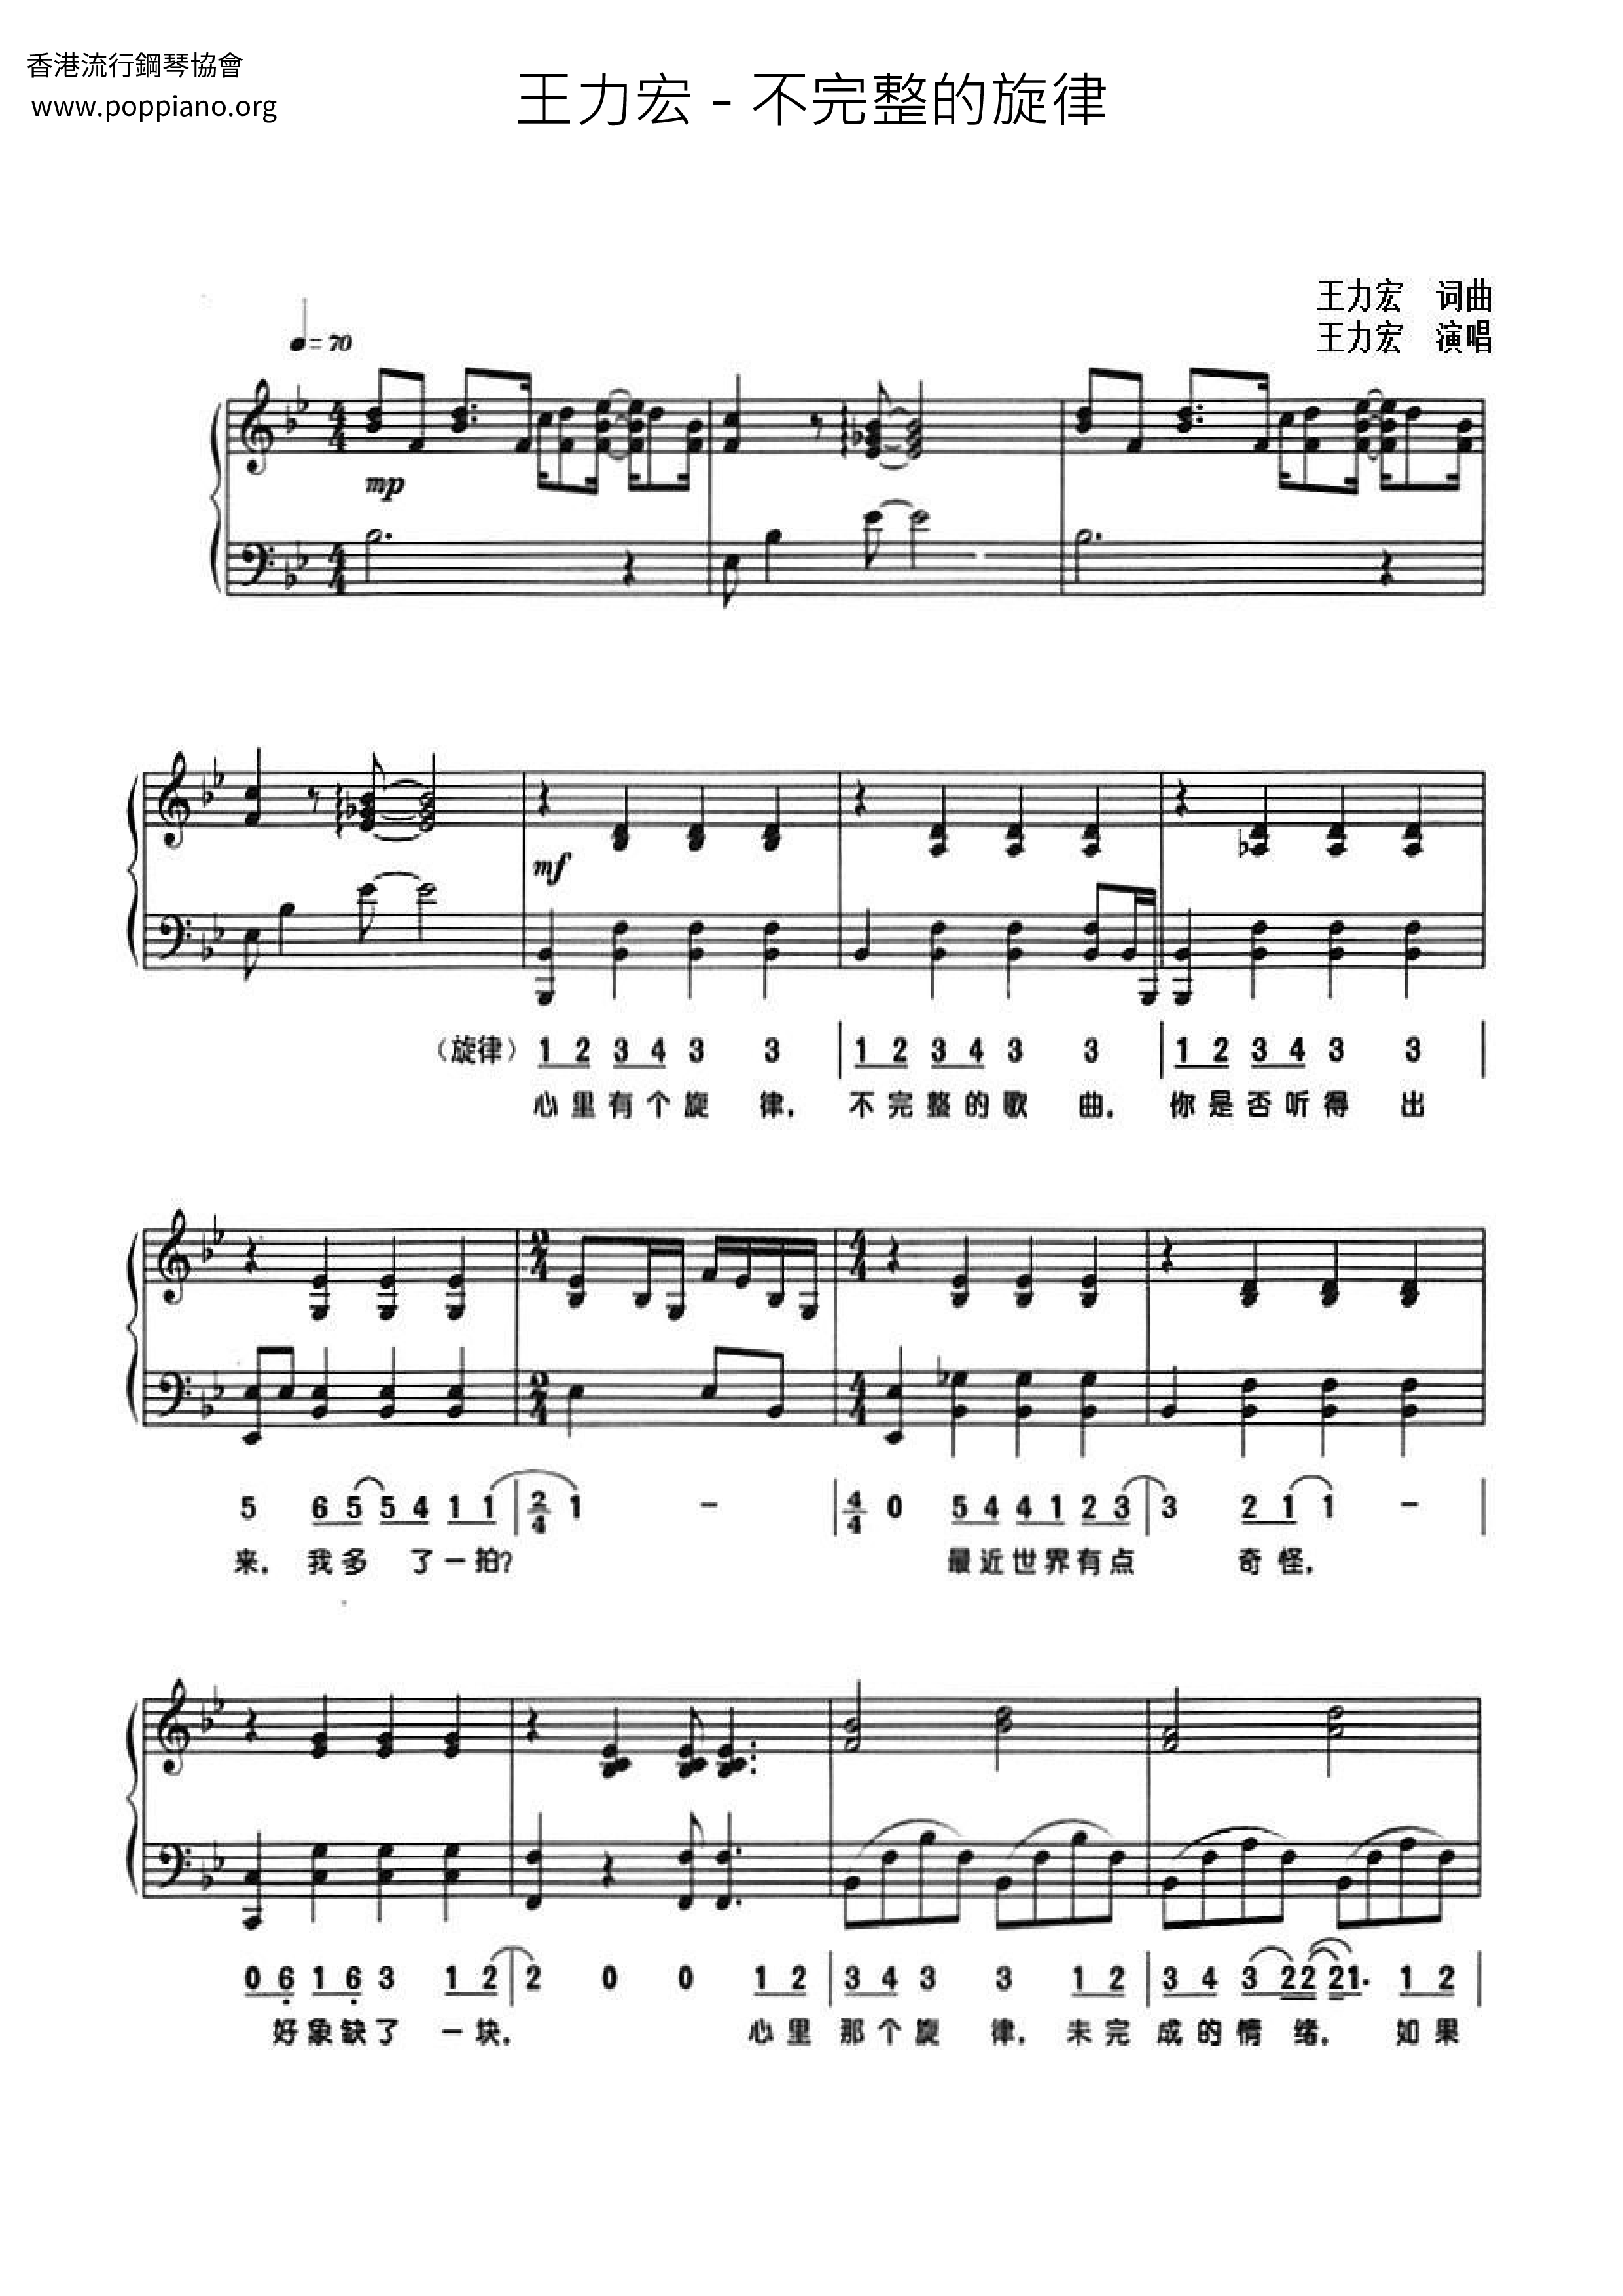 Incomplete Melody Score